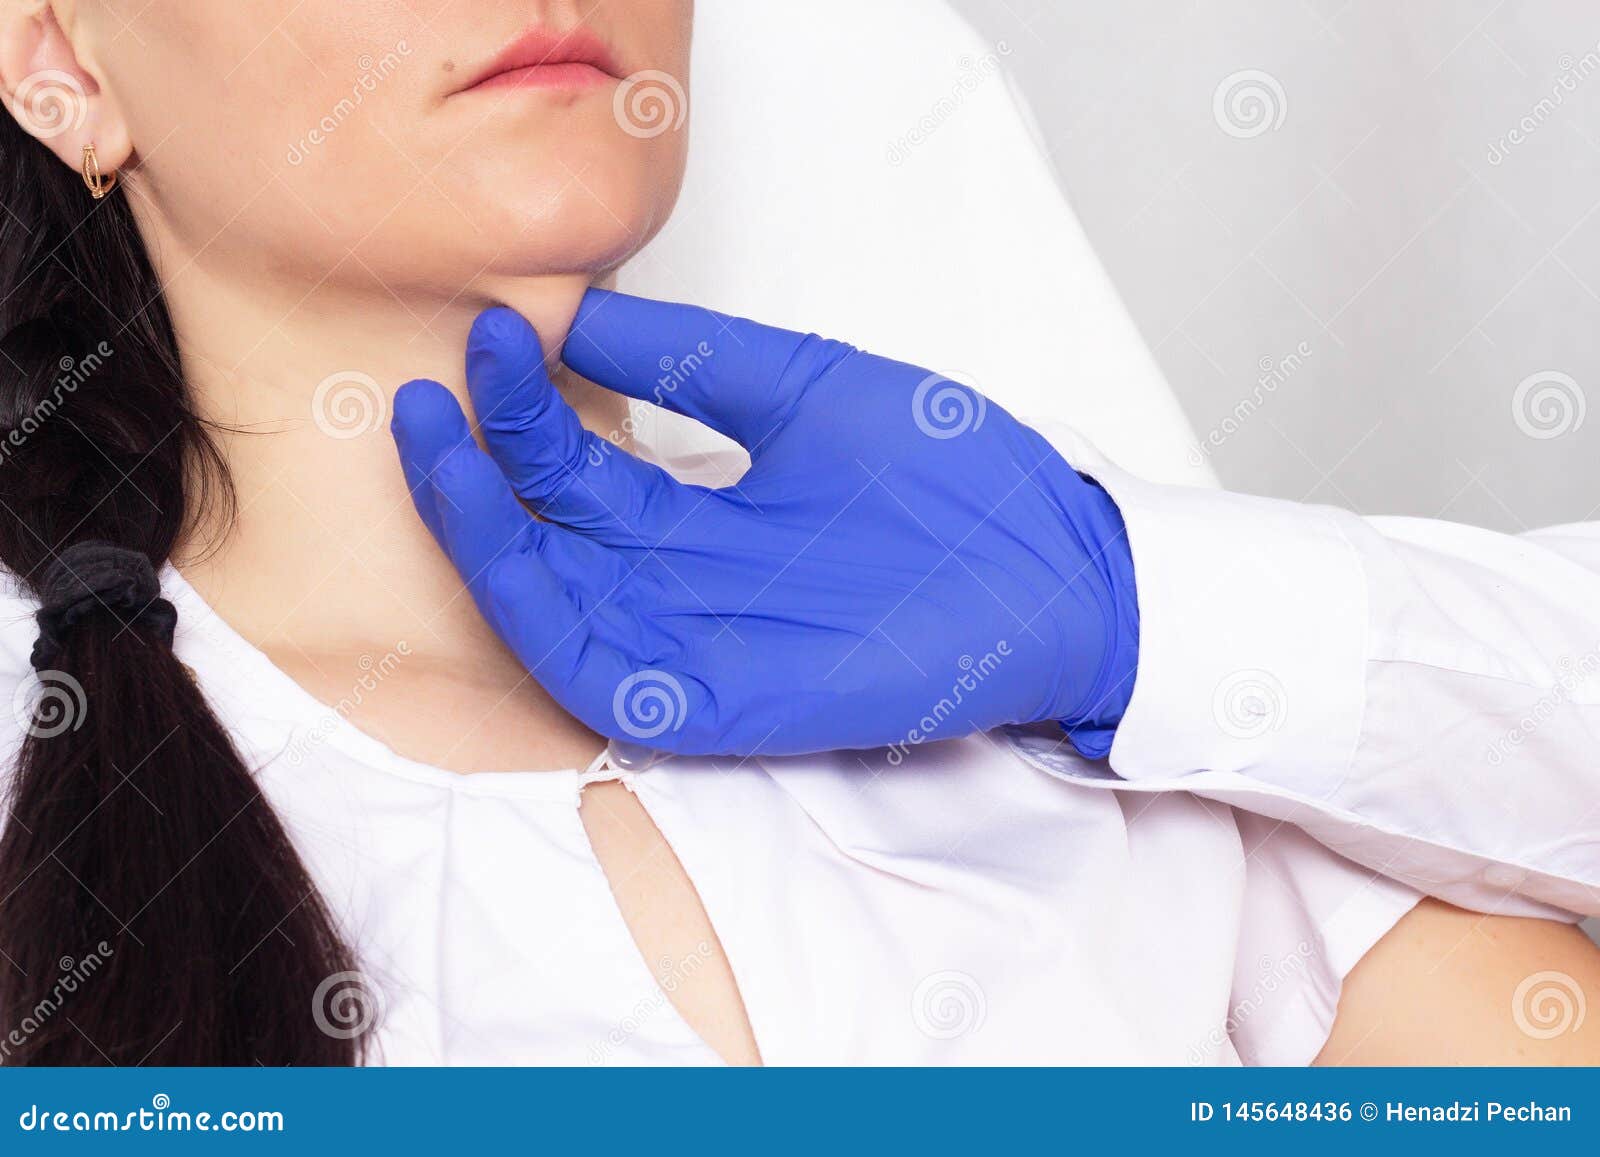 doctor cosmetologist checks the skin for elasticity on a double chin in a girl, close-up, cosmetology, resilience